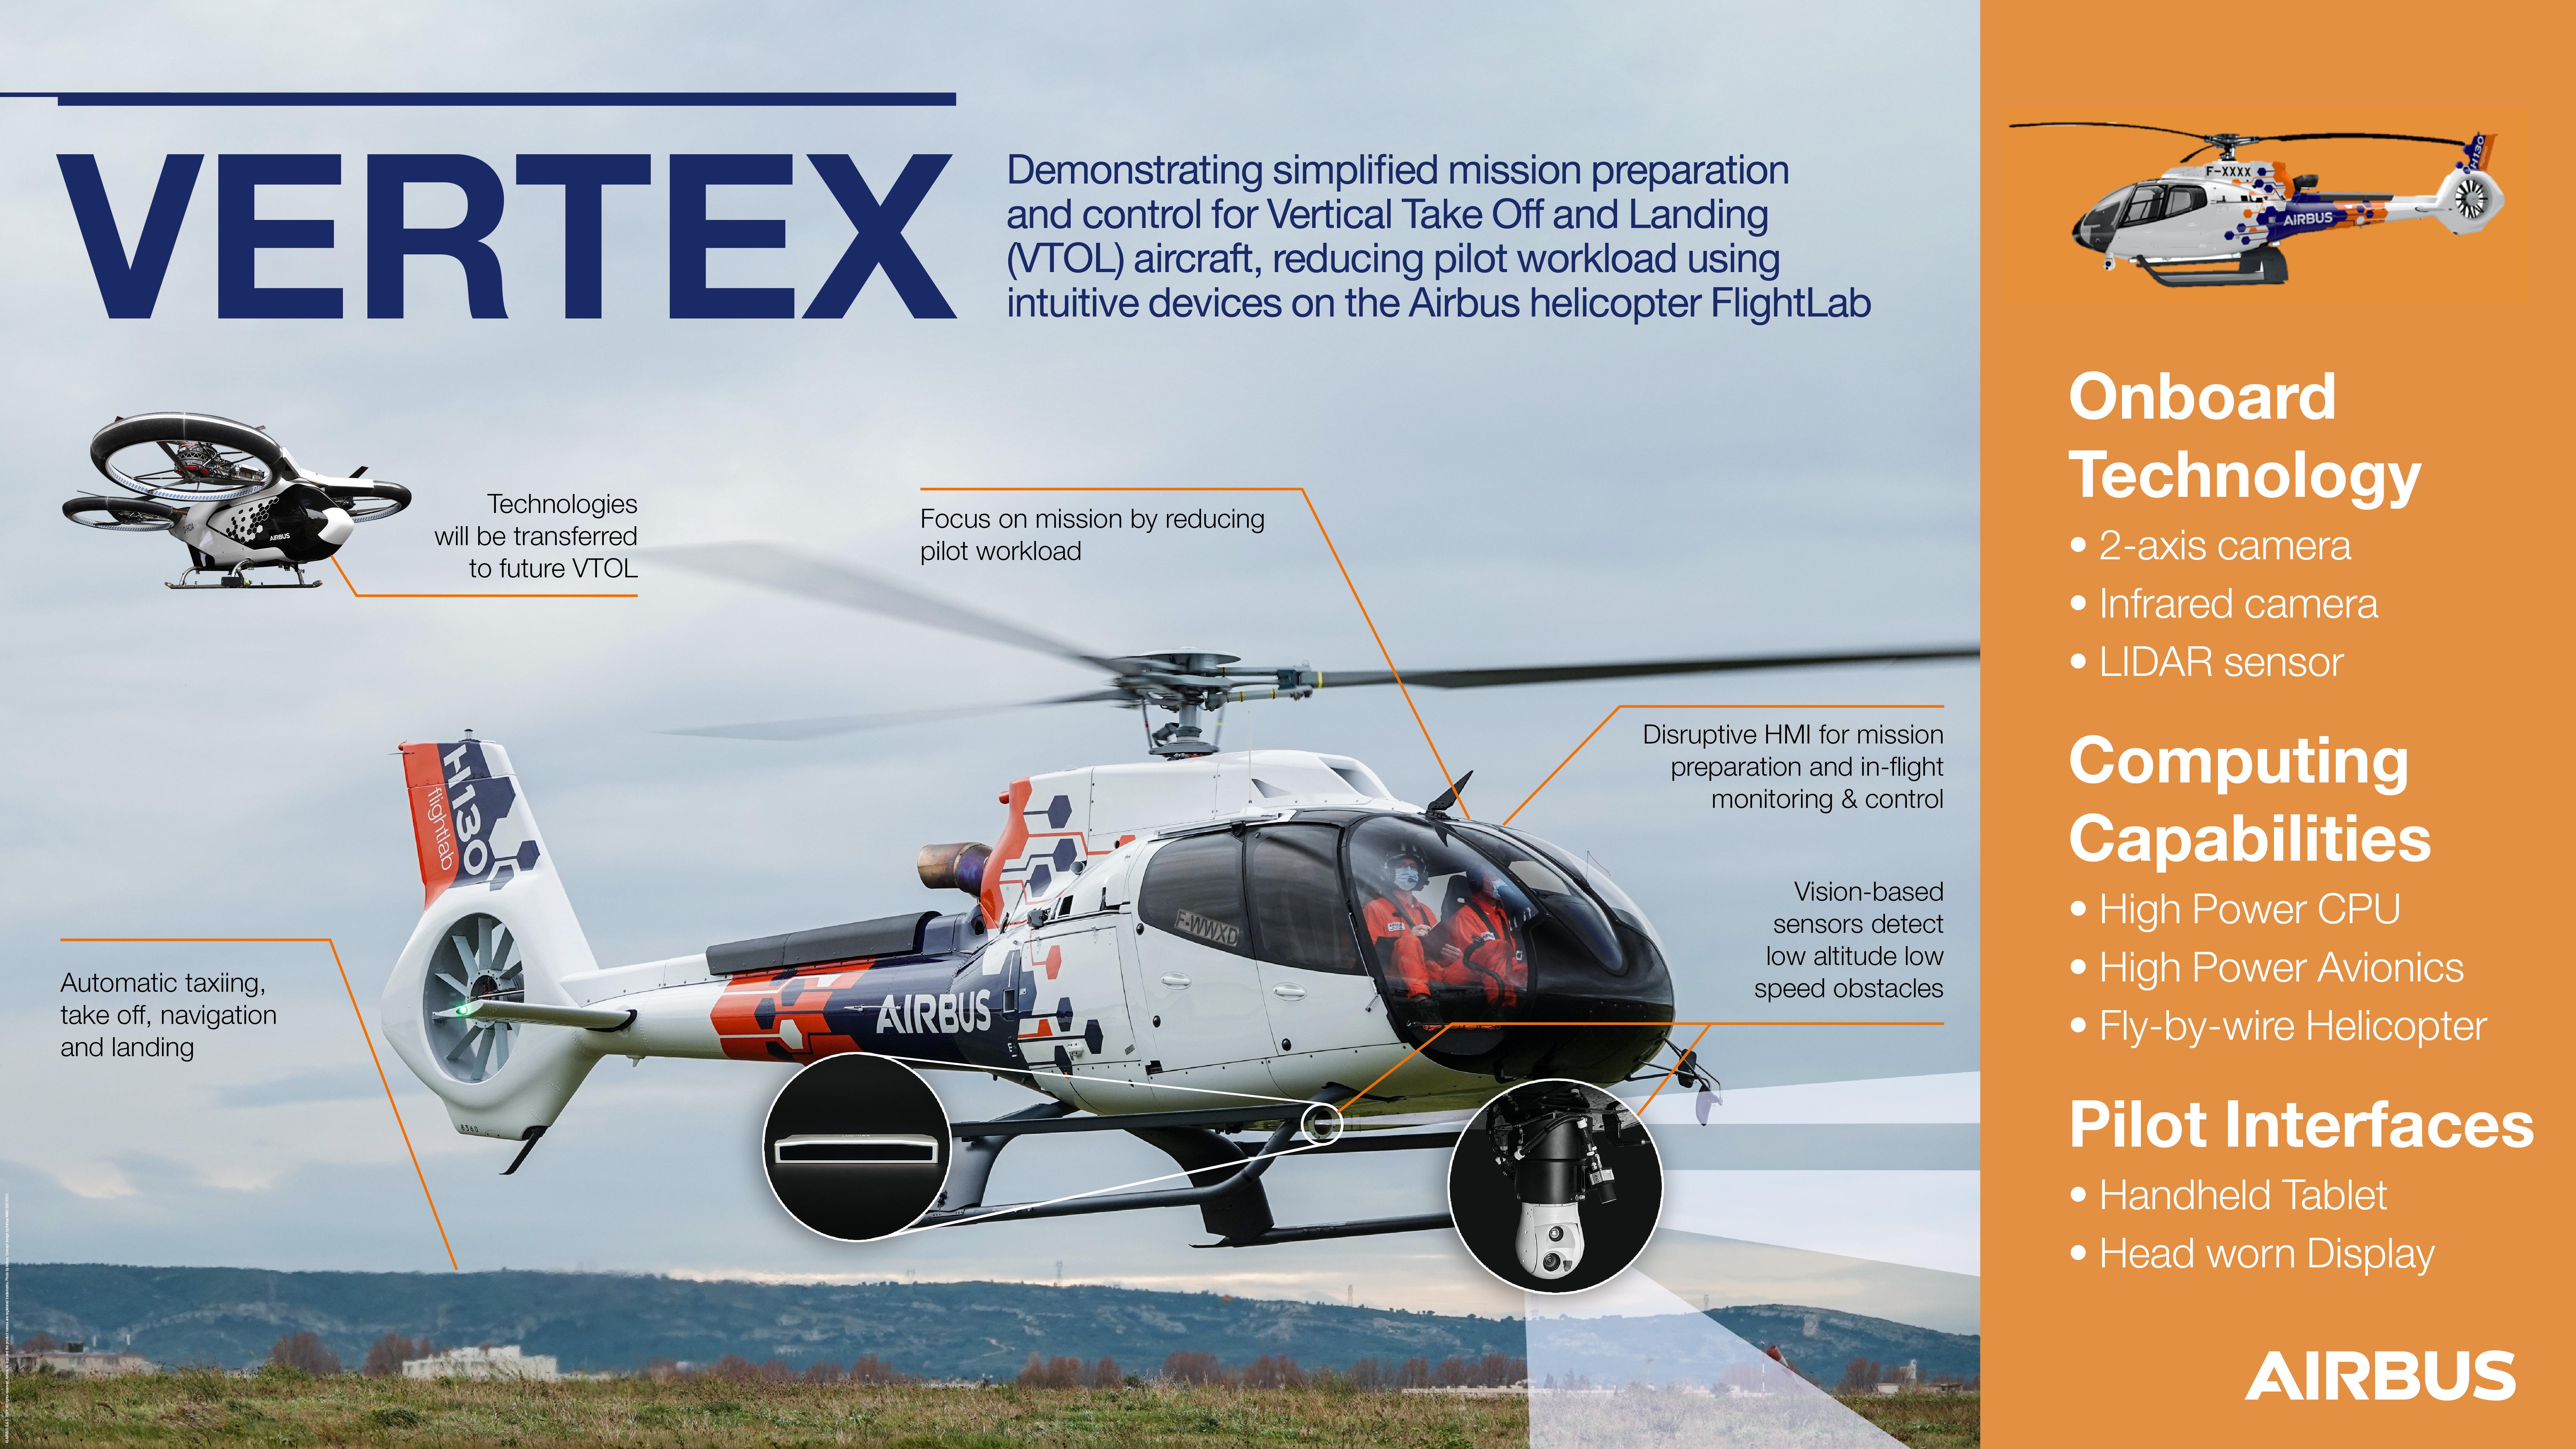 Flywing Helicopter: Innovative Potential and Environmental Benefits of Flywing Helicopters